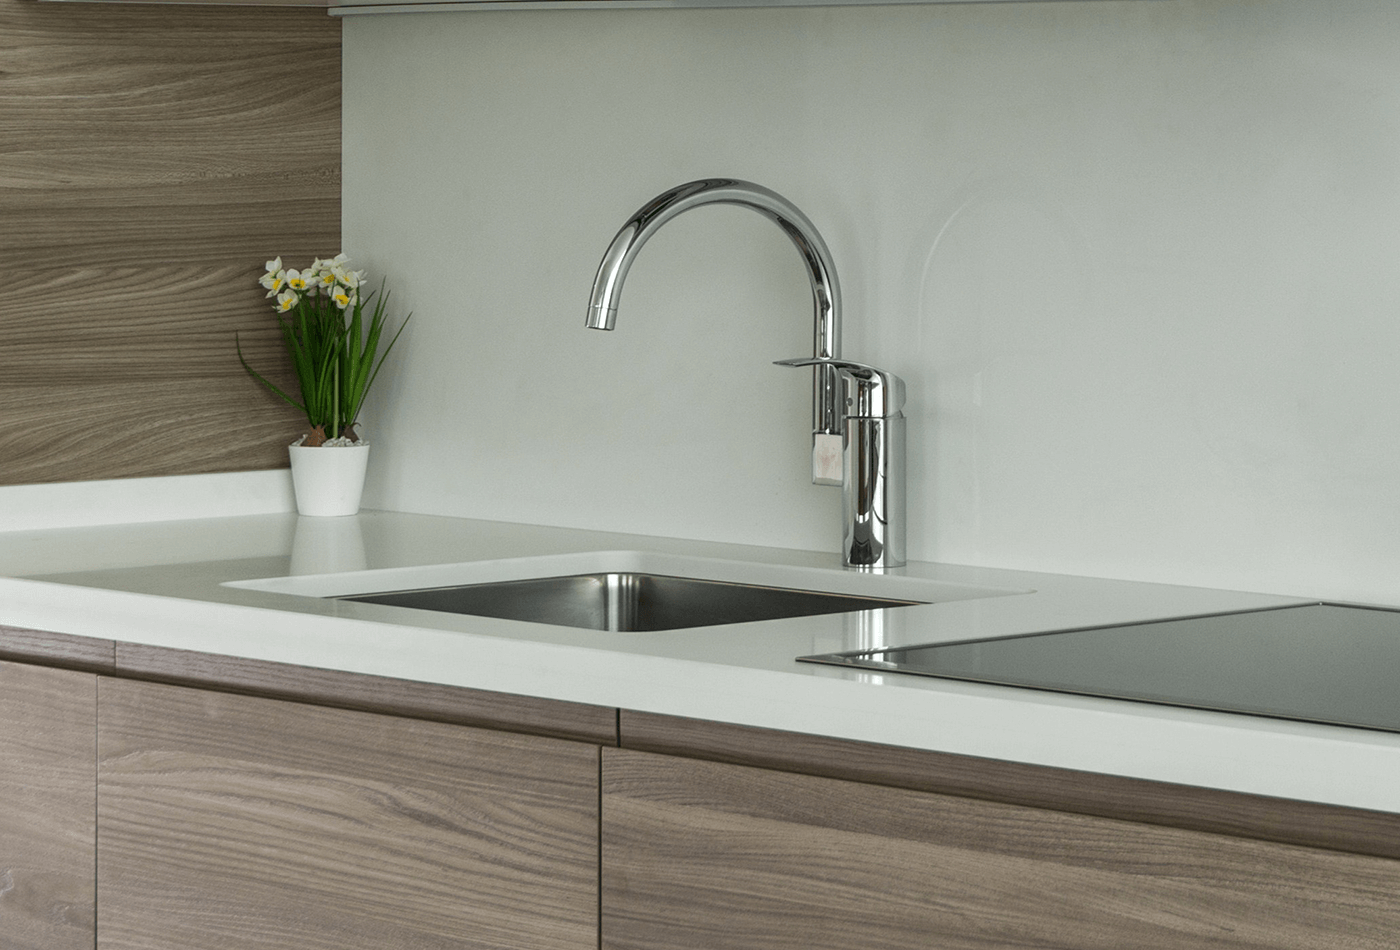 Where To Buy Kitchen Sink With Tap In London, UK?